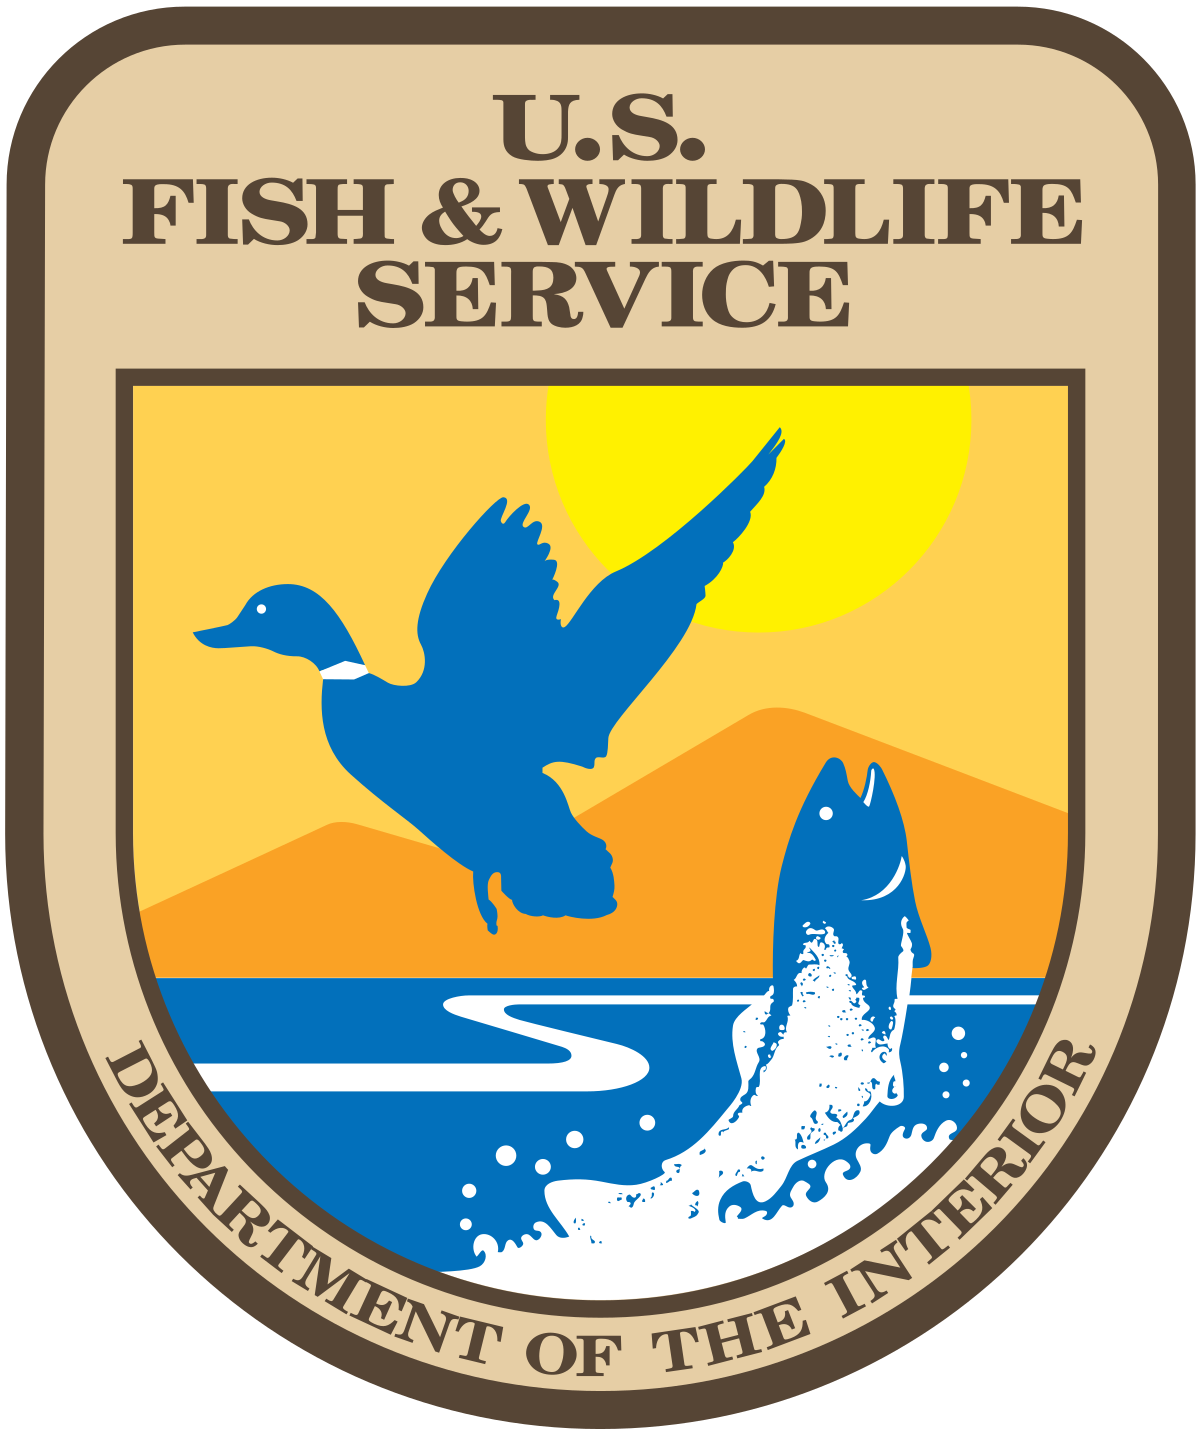 1200px-Seal_of_the_United_States_Fish_and_Wildlife_Service.svg.png